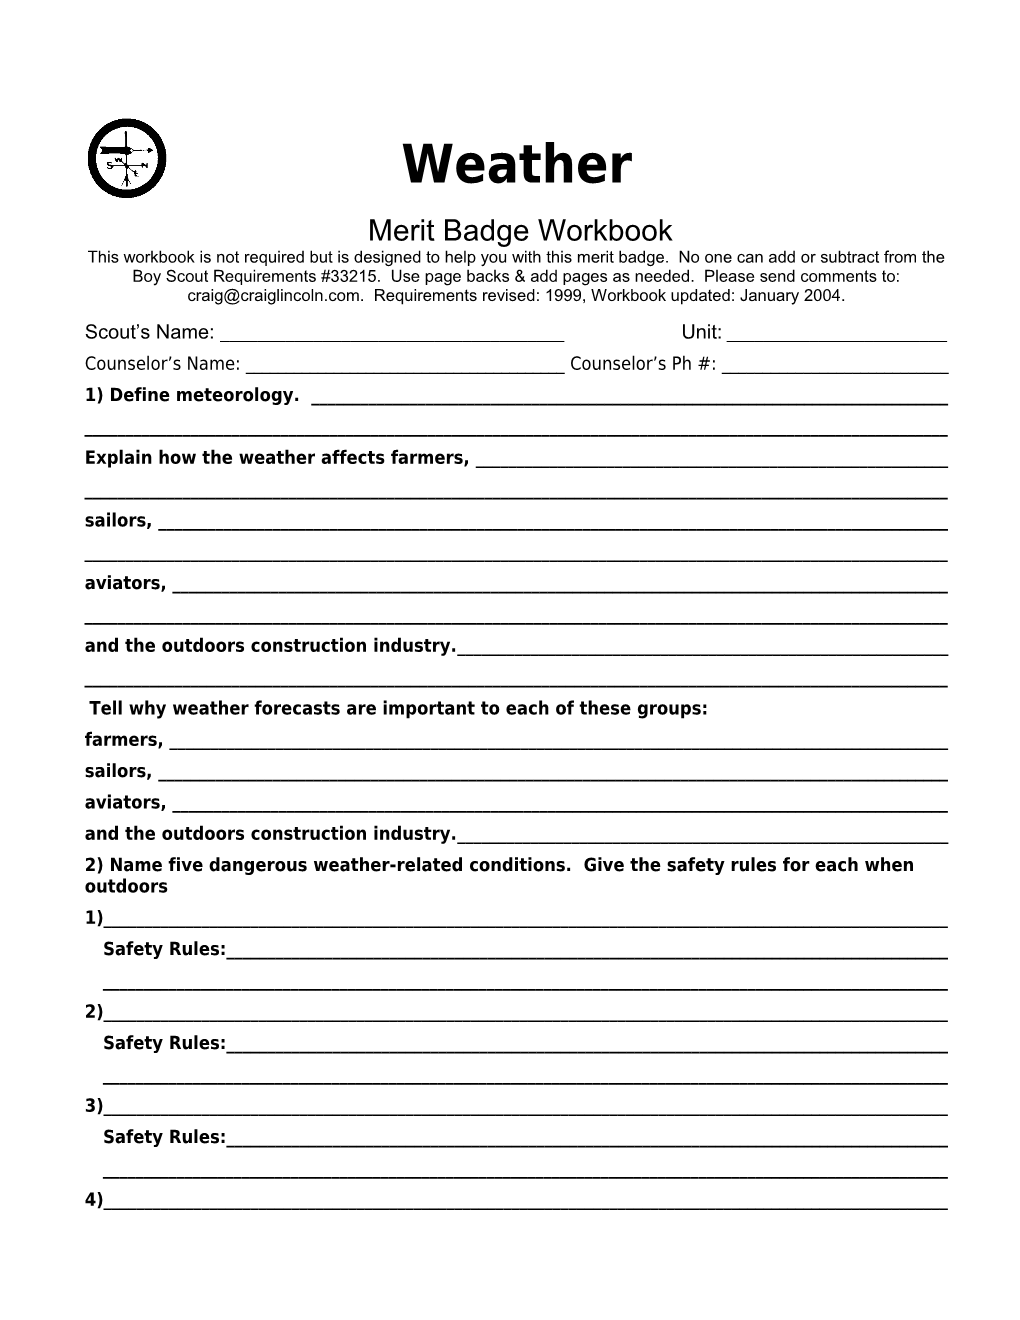 Weather P. 5 Merit Badge Workbook Scout's Name: ______